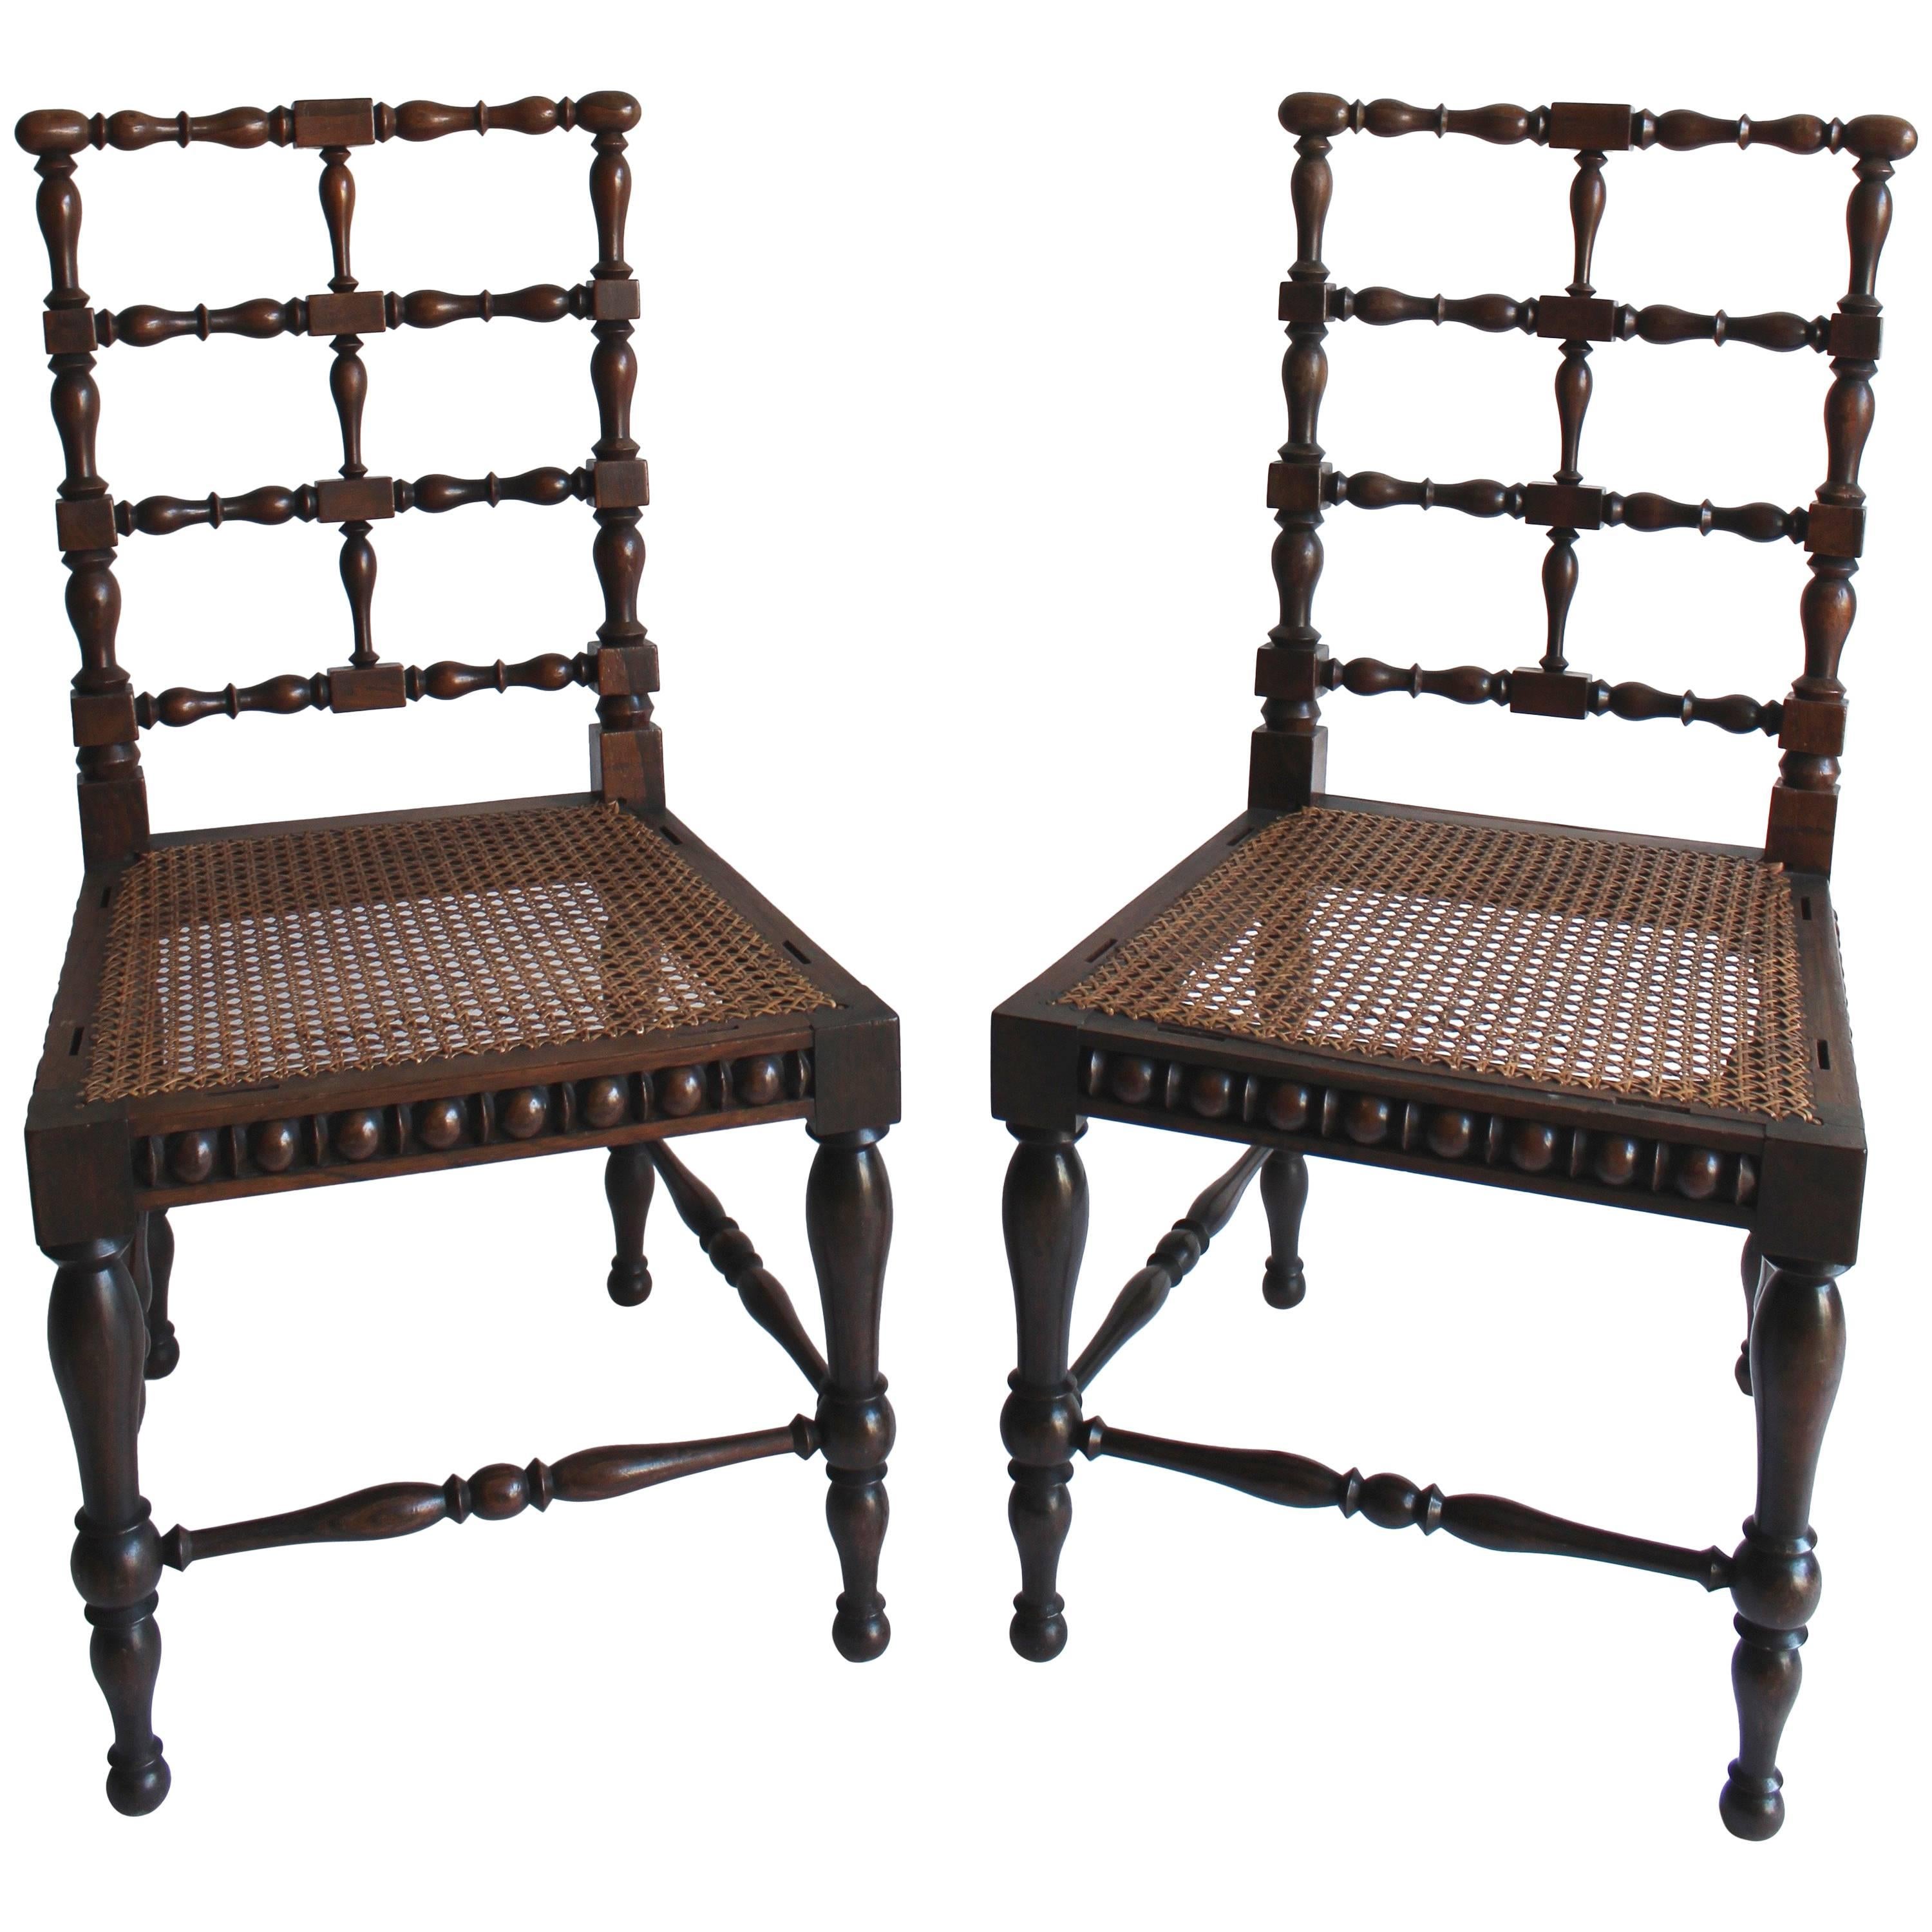 Pair of Late 19th Century Austrian Rosewood Spindle Chairs with Cane Seats